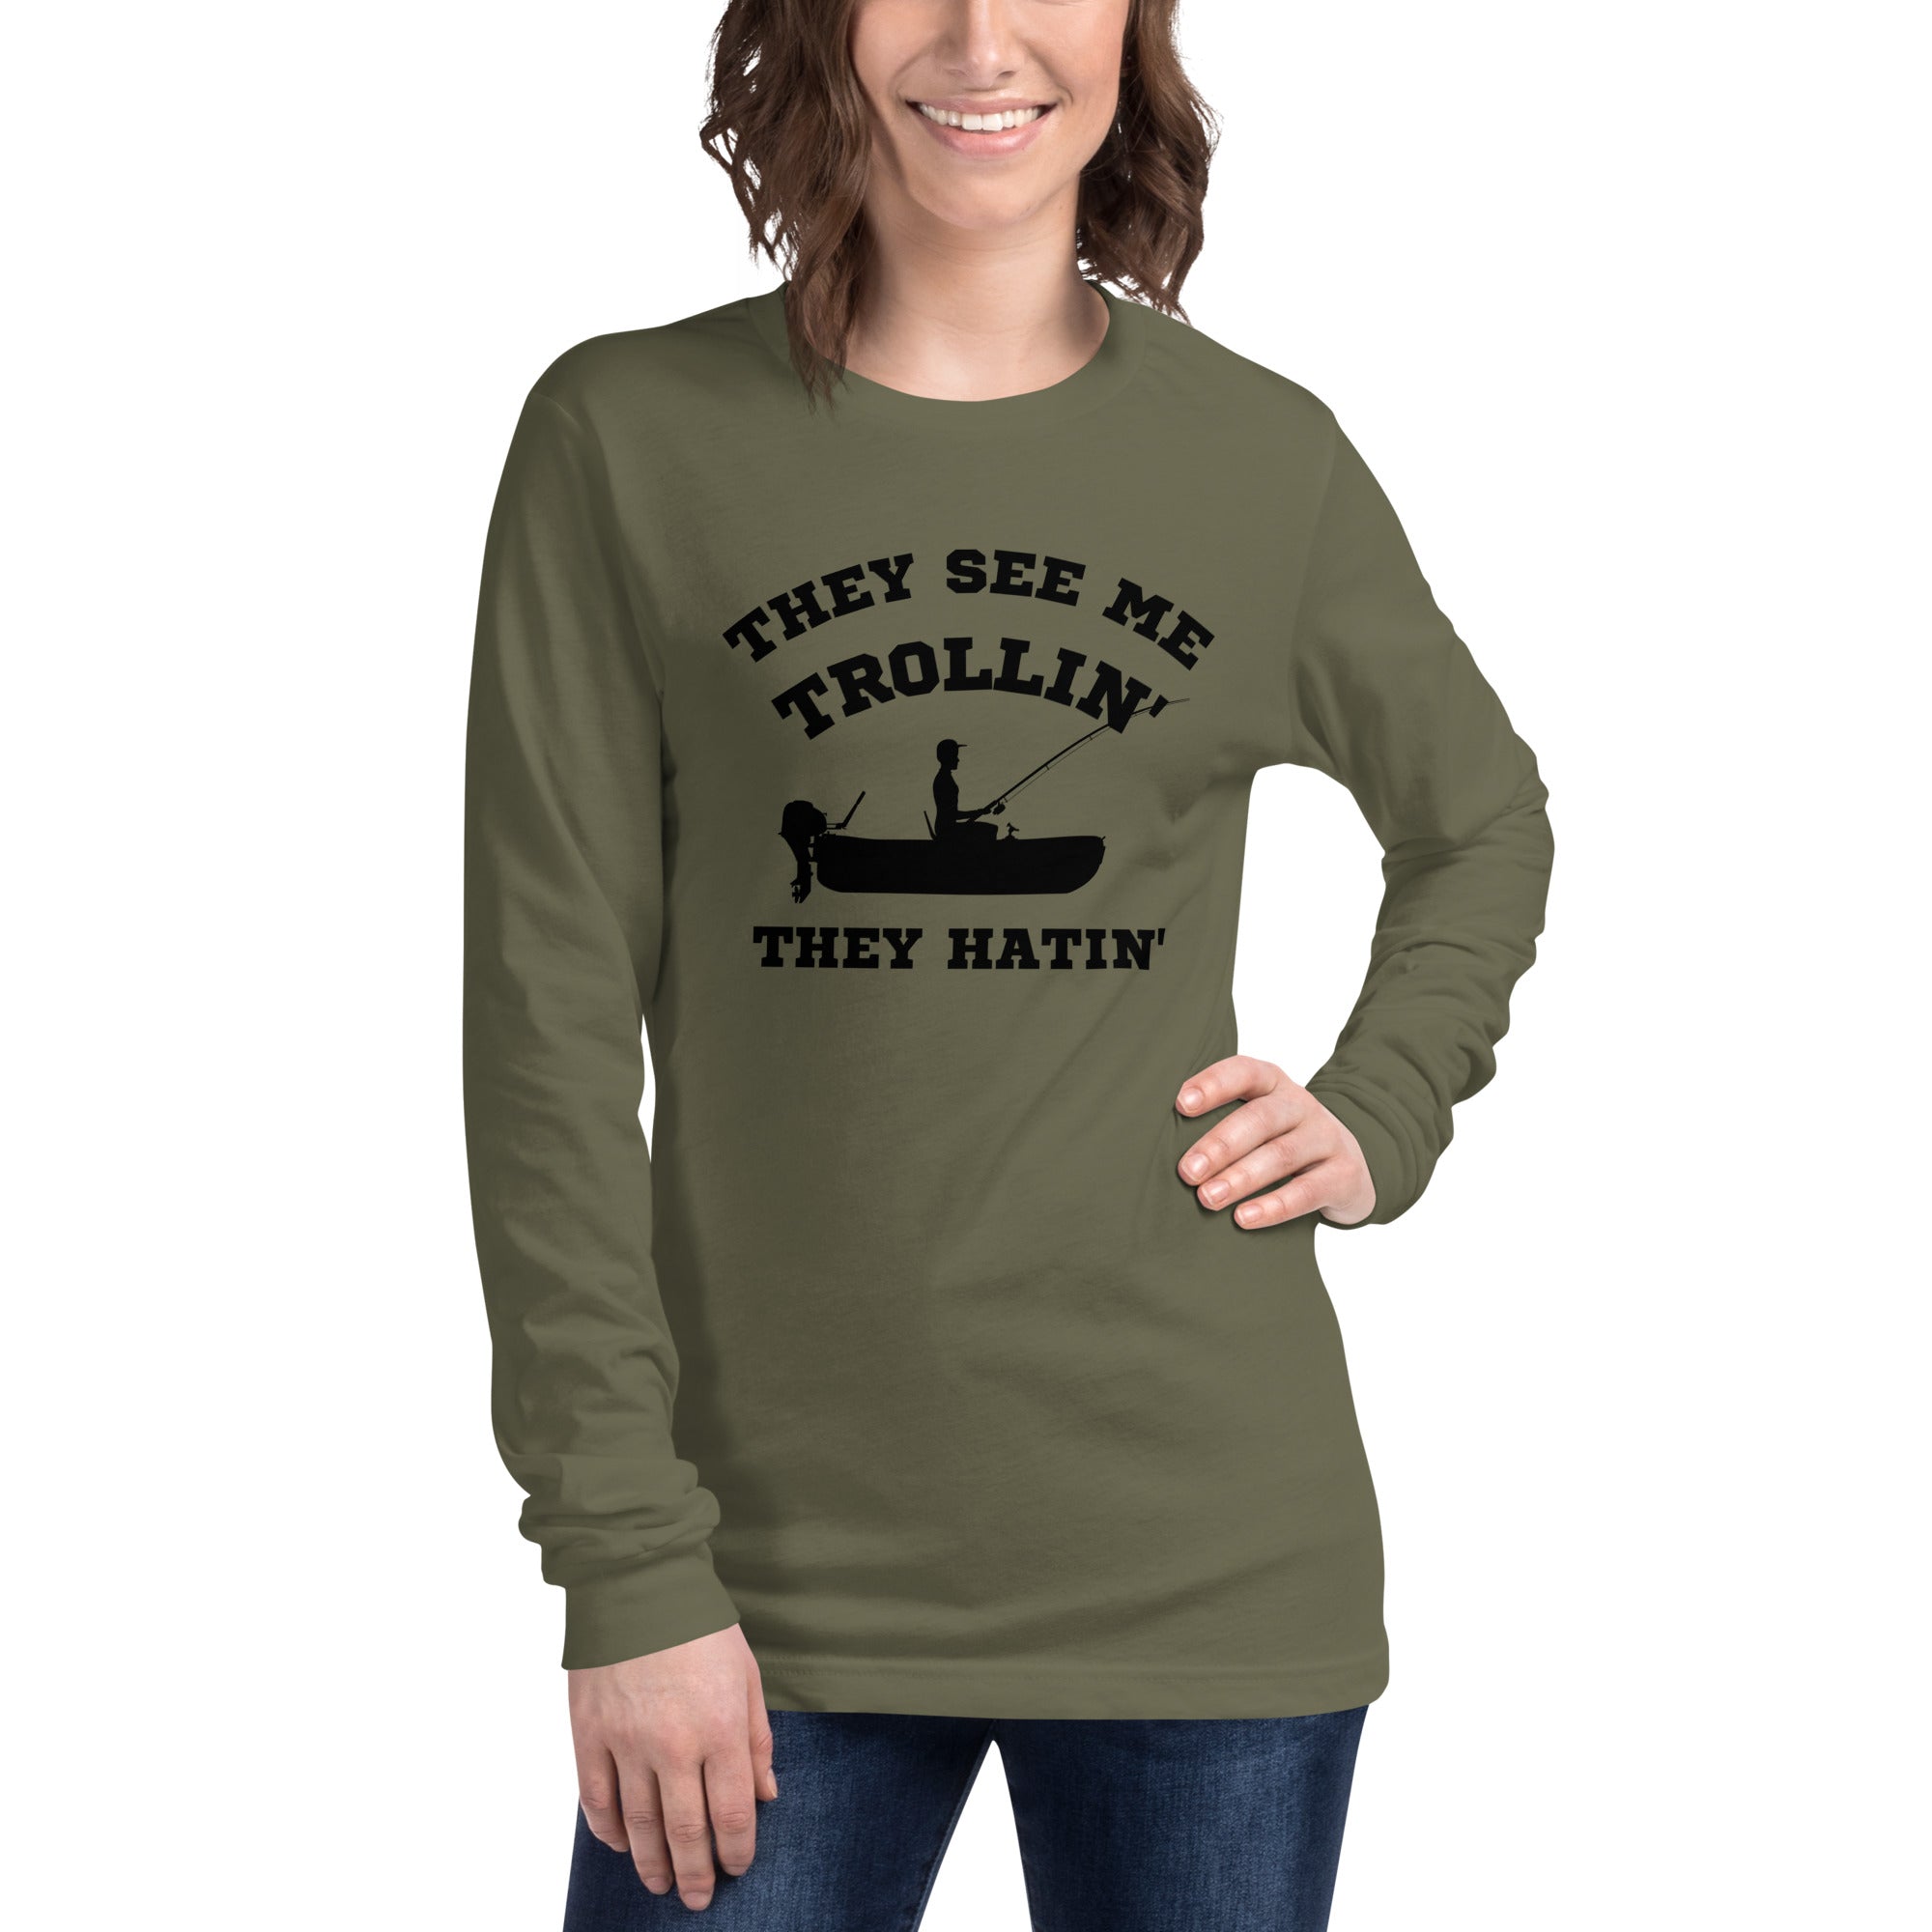 They See Me Trollin' Women's Select Long Sleeve